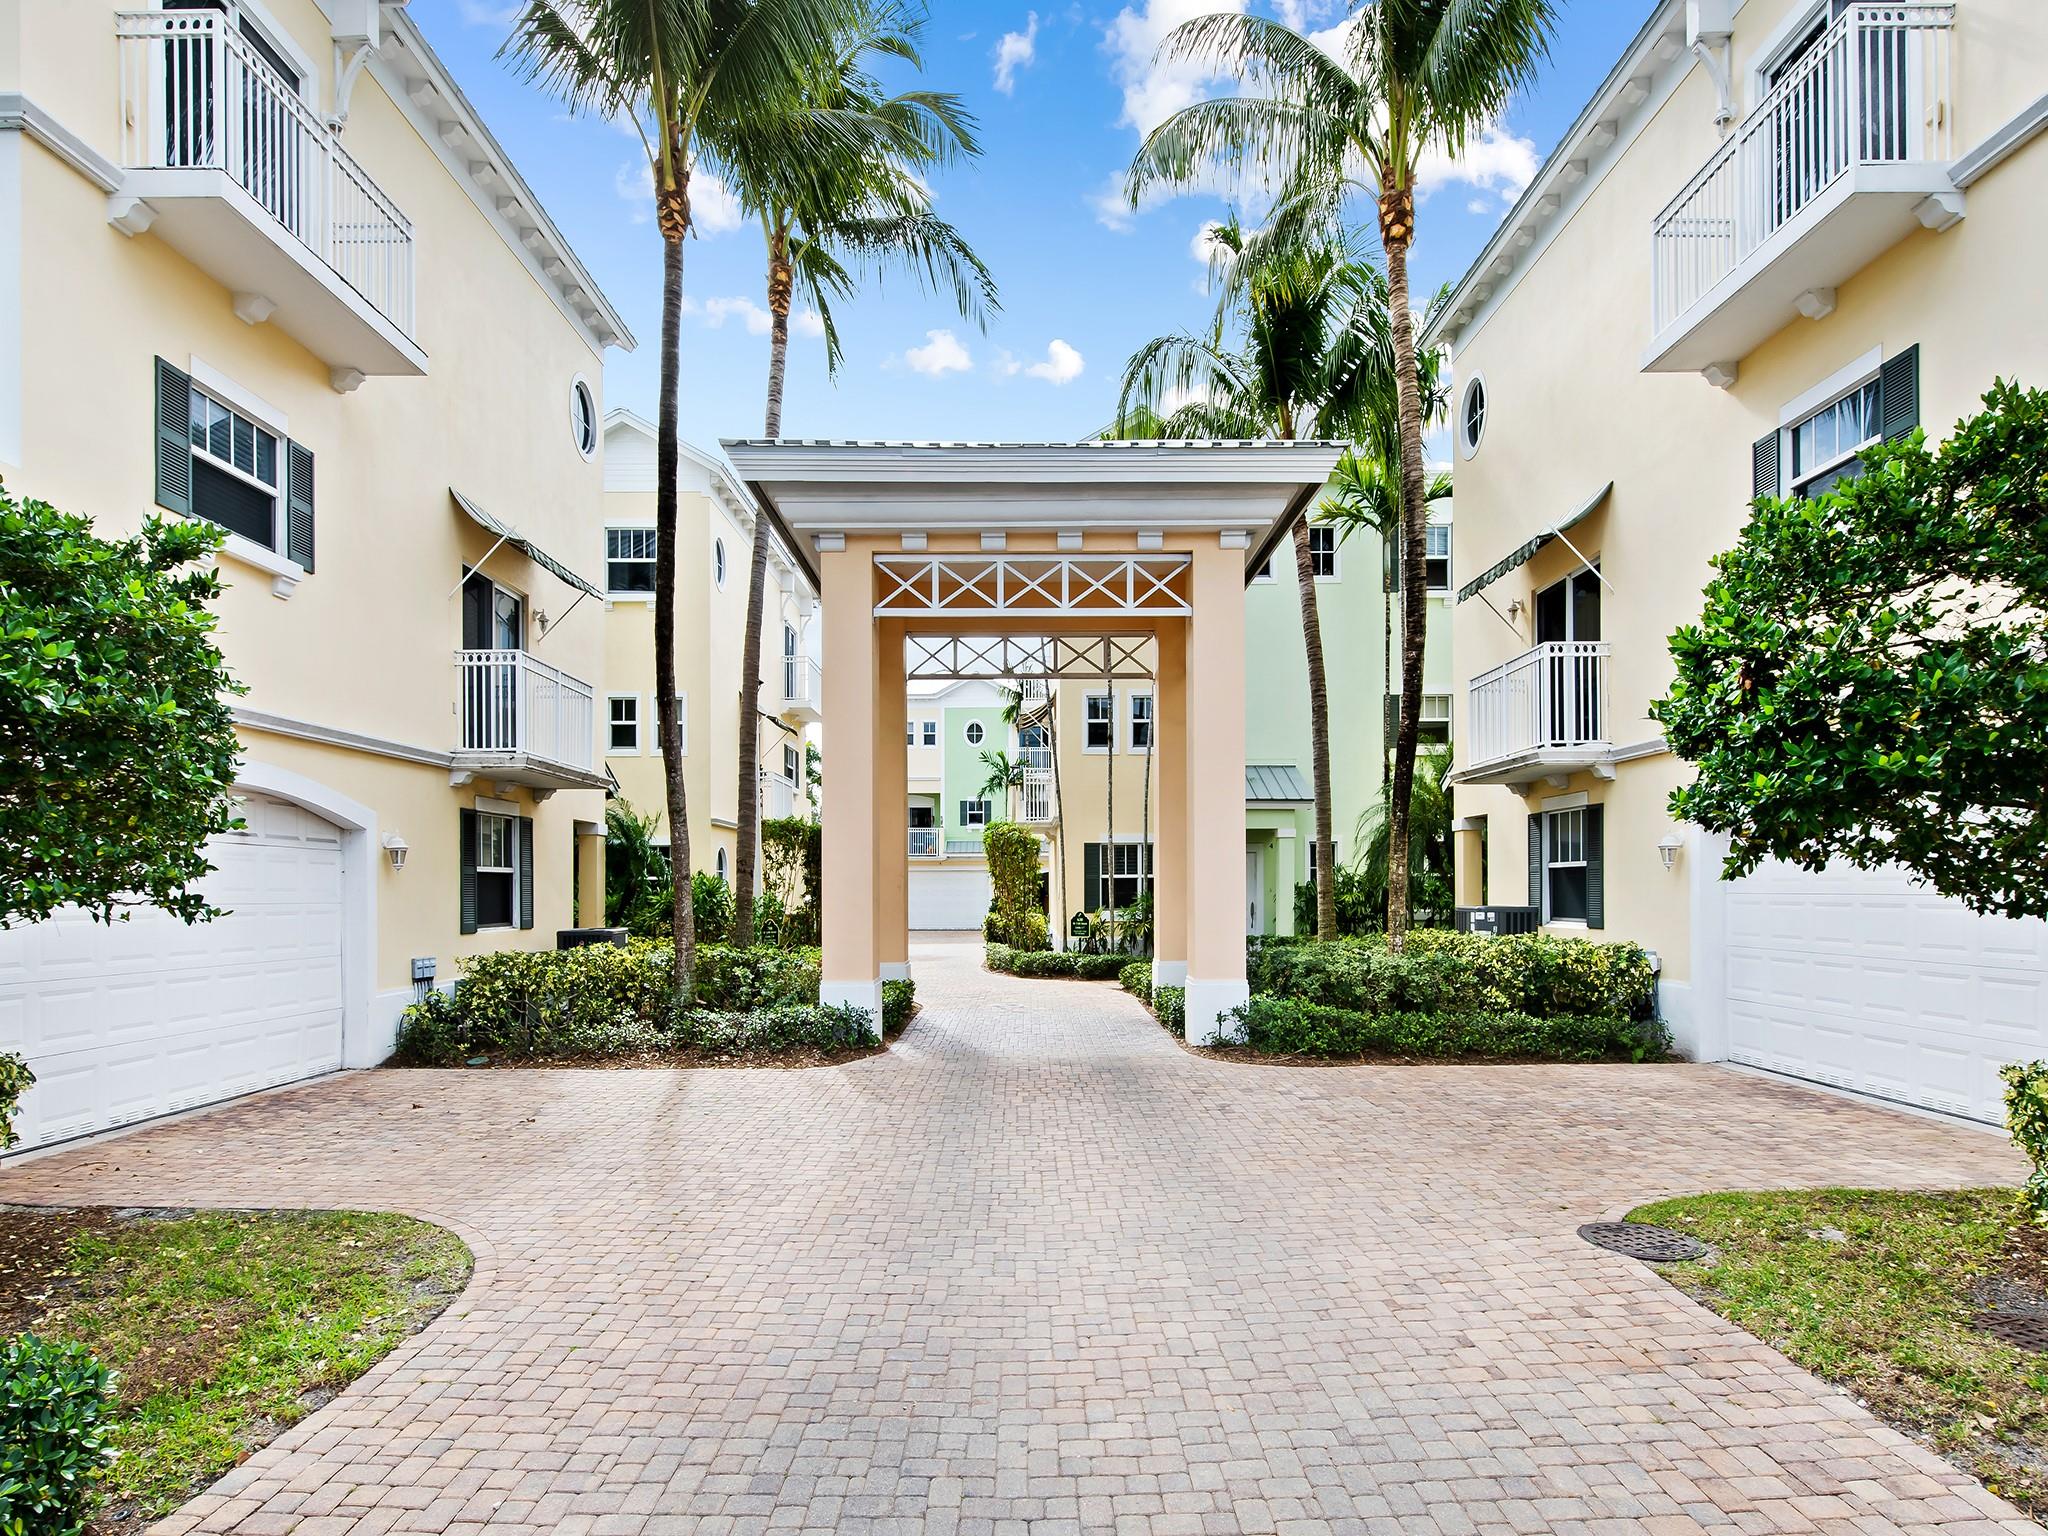 View Fort Lauderdale, FL 33316 townhome